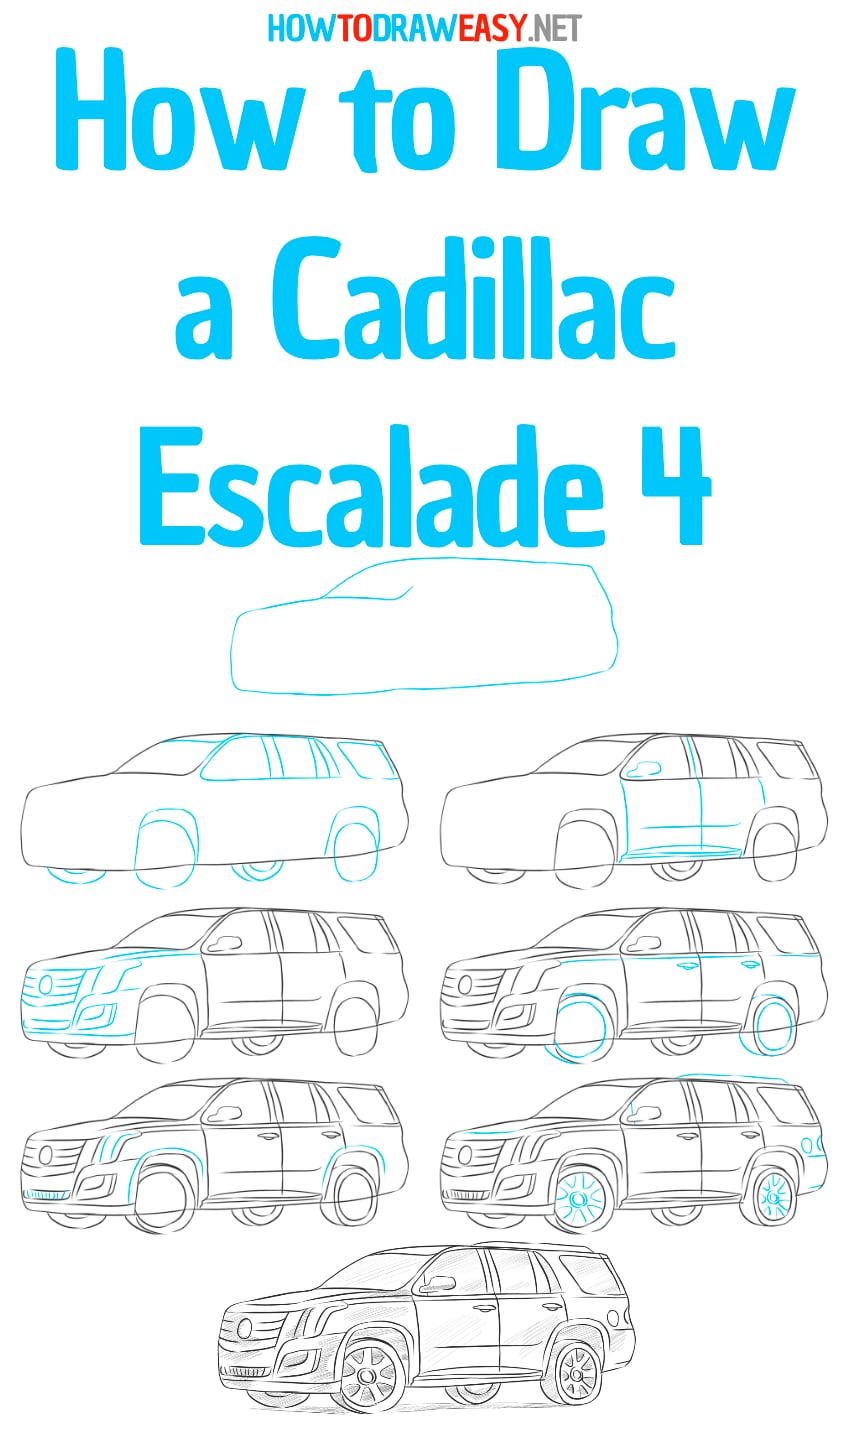 how to draw a cadillac escalade 4 step by step